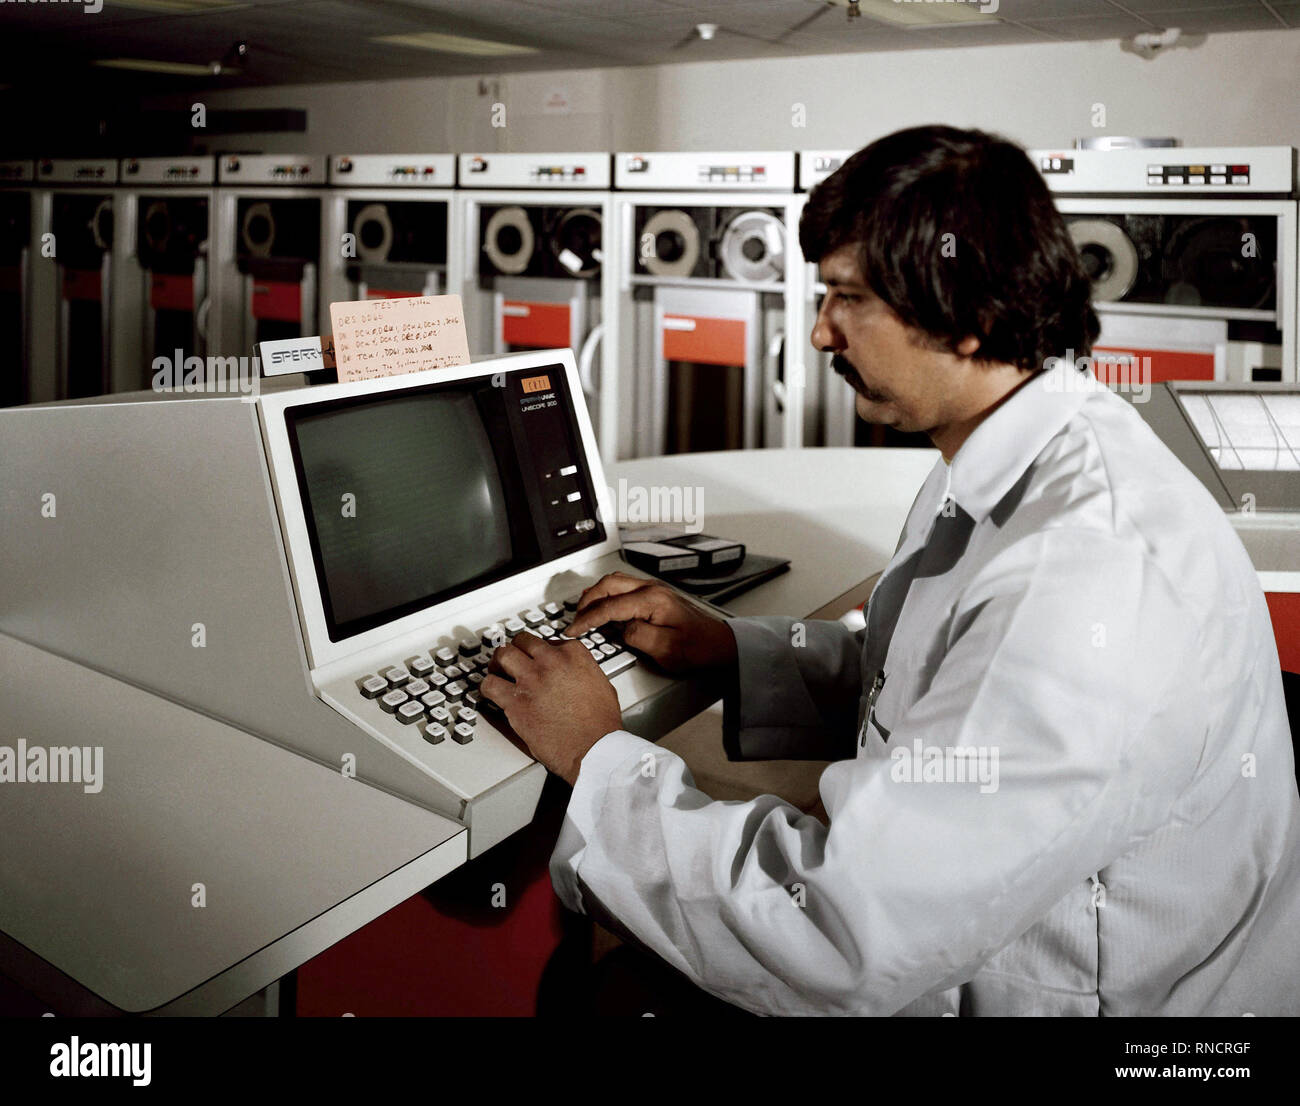 1981 - A technician operates the system console on the new UNIVAC 1100/83 computer at the Fleet Analysis Center, Corona Annex, Naval Weapons Station, Seal Beach, California. Stock Photo